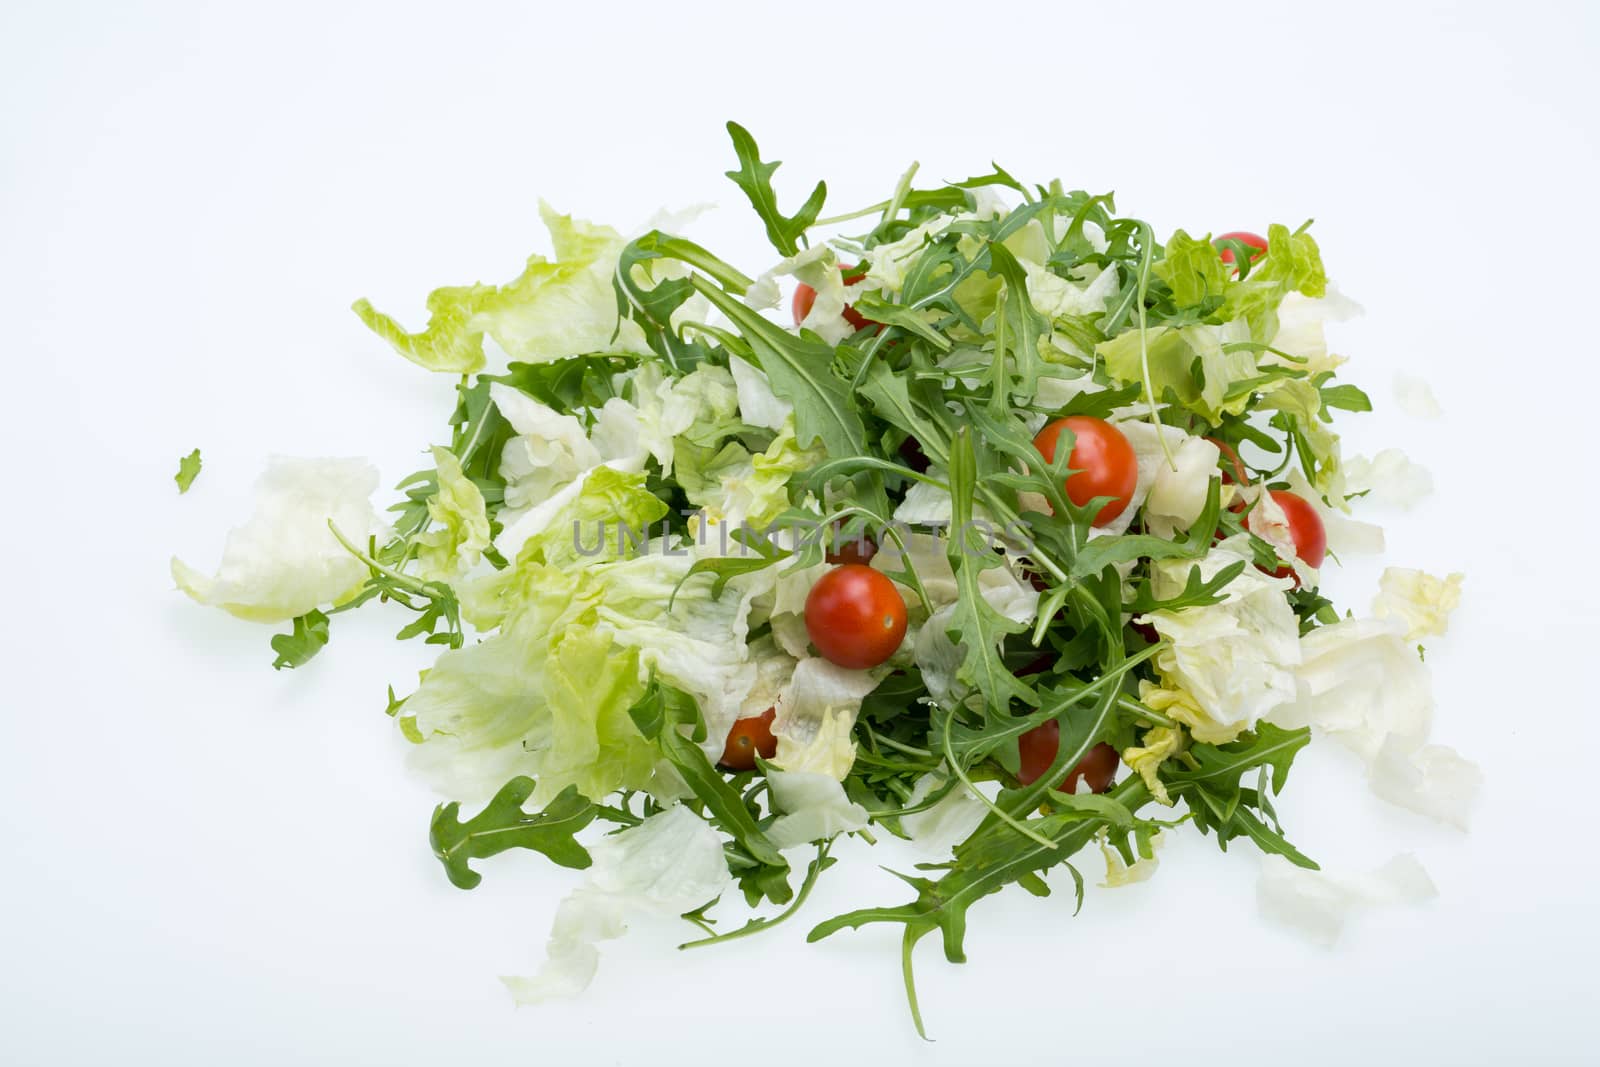 Heap of ruccola, lettuce leaves and cherry tomatoes by wjarek